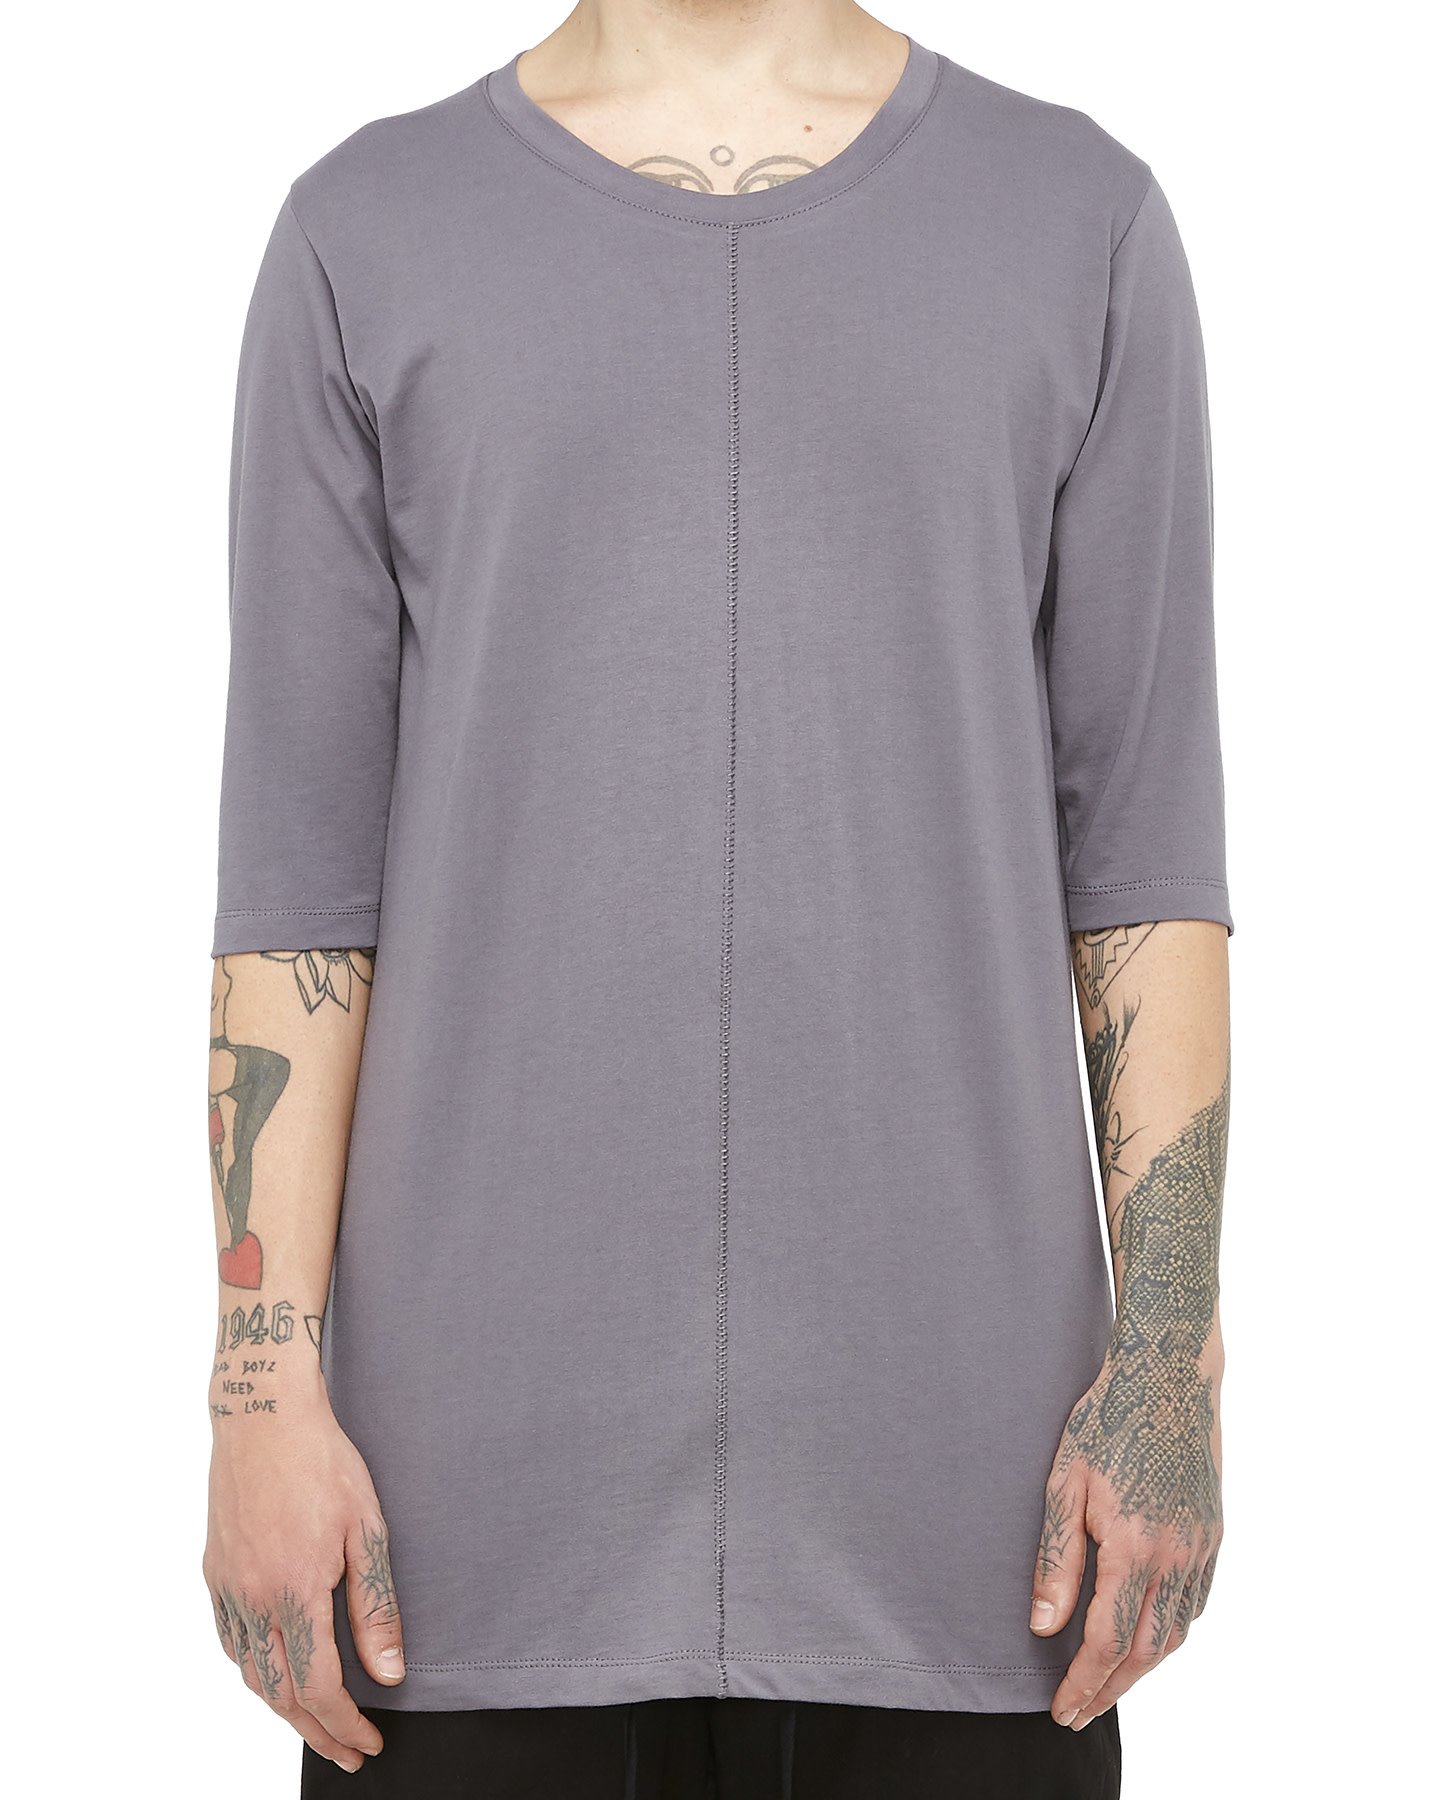 FITTED 3/4 SLEEVE T-SHIRT - GREY